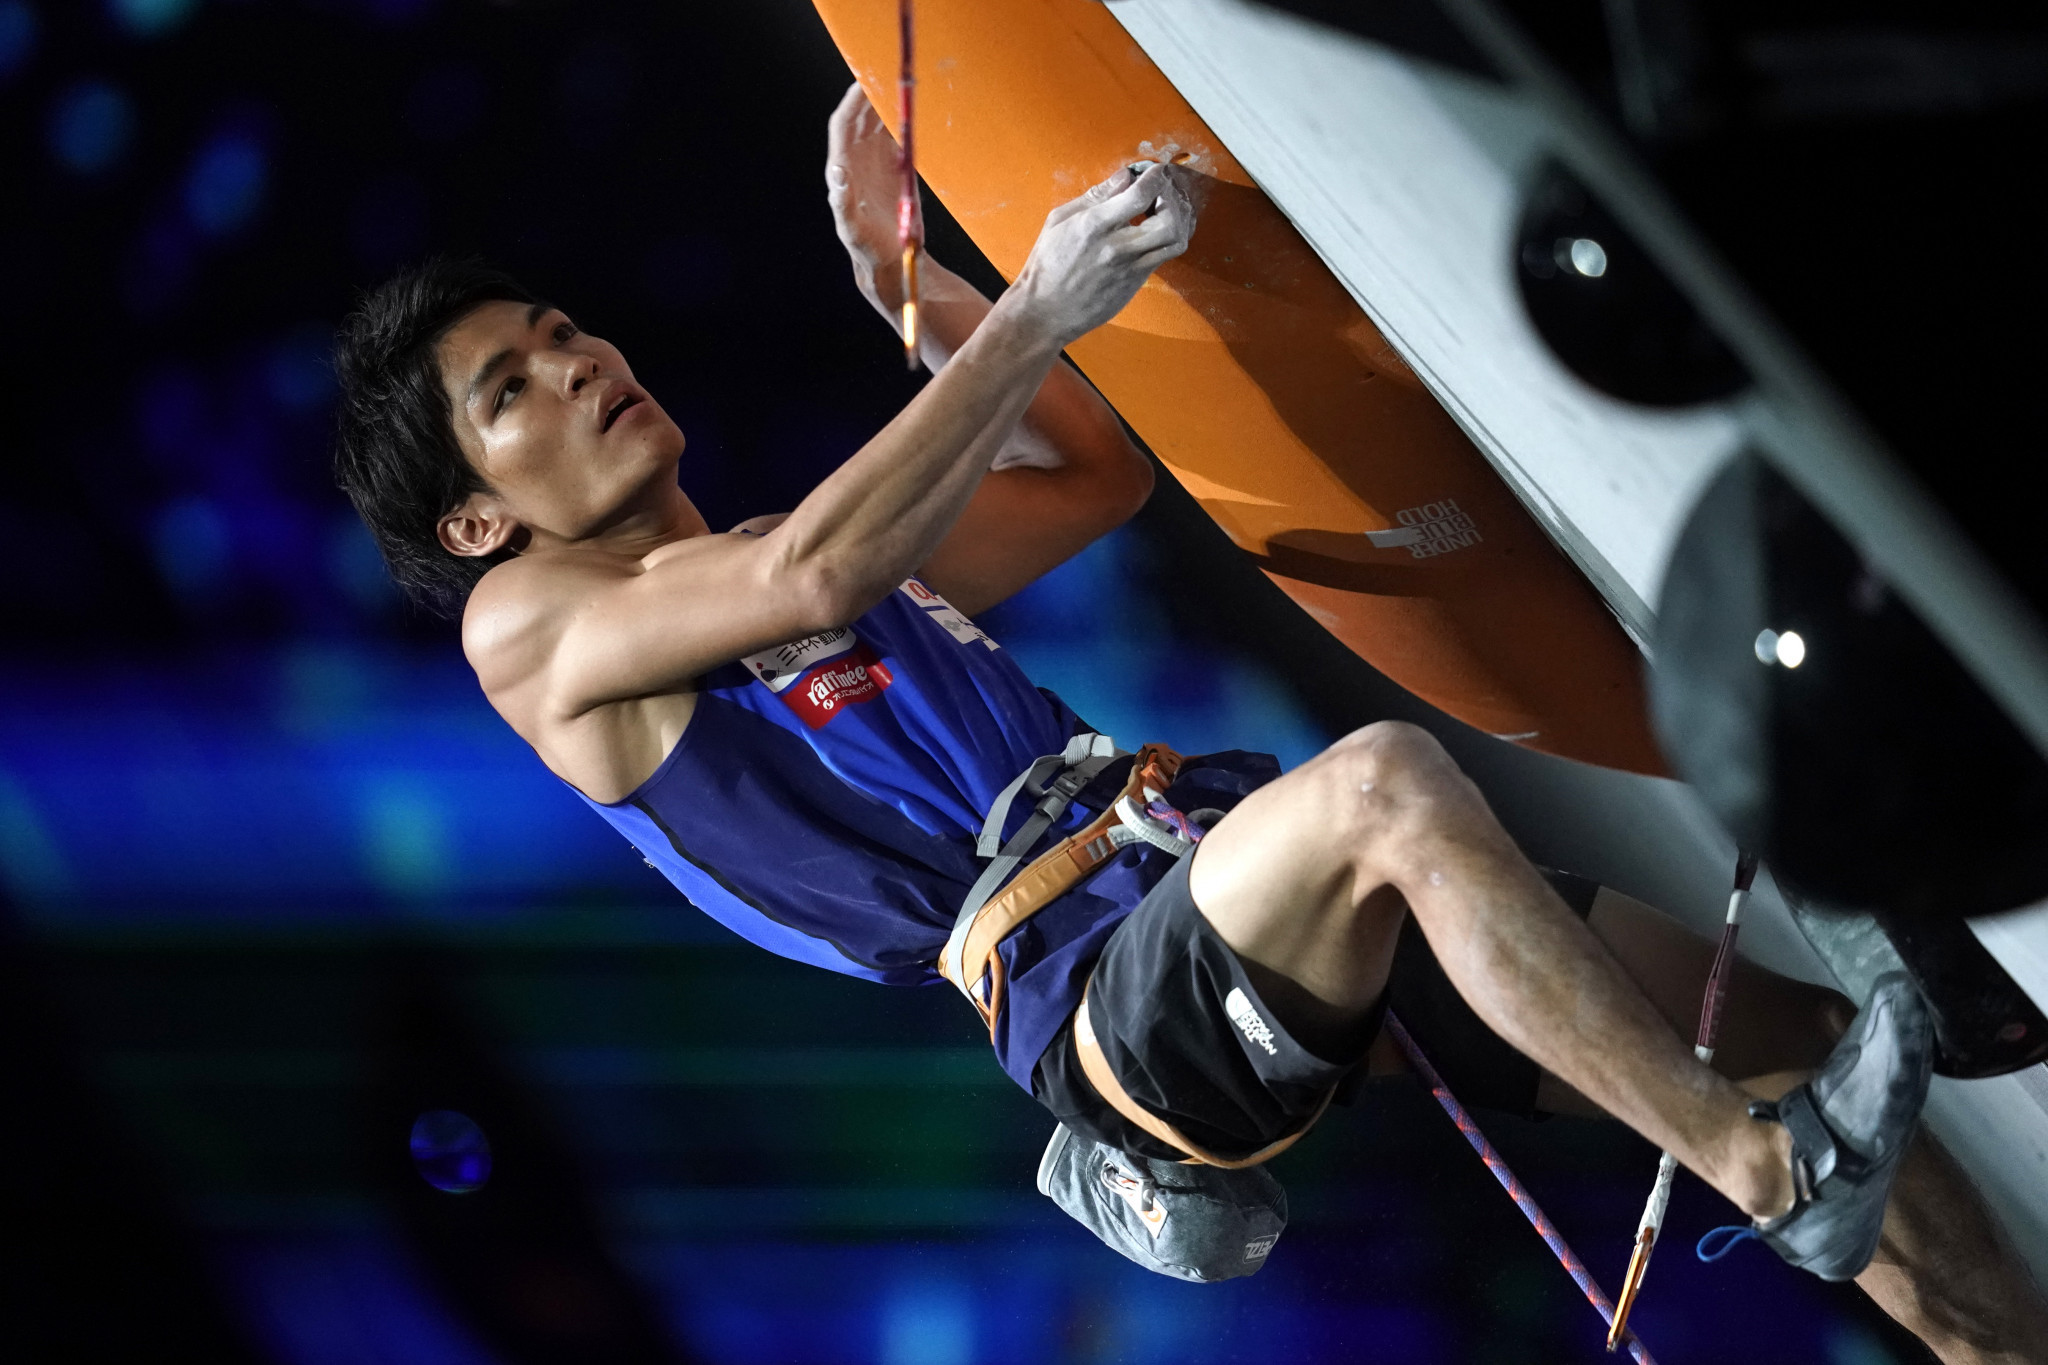 Tomoa Narasaki won the combined world title on home soil for Japan ©Getty Images